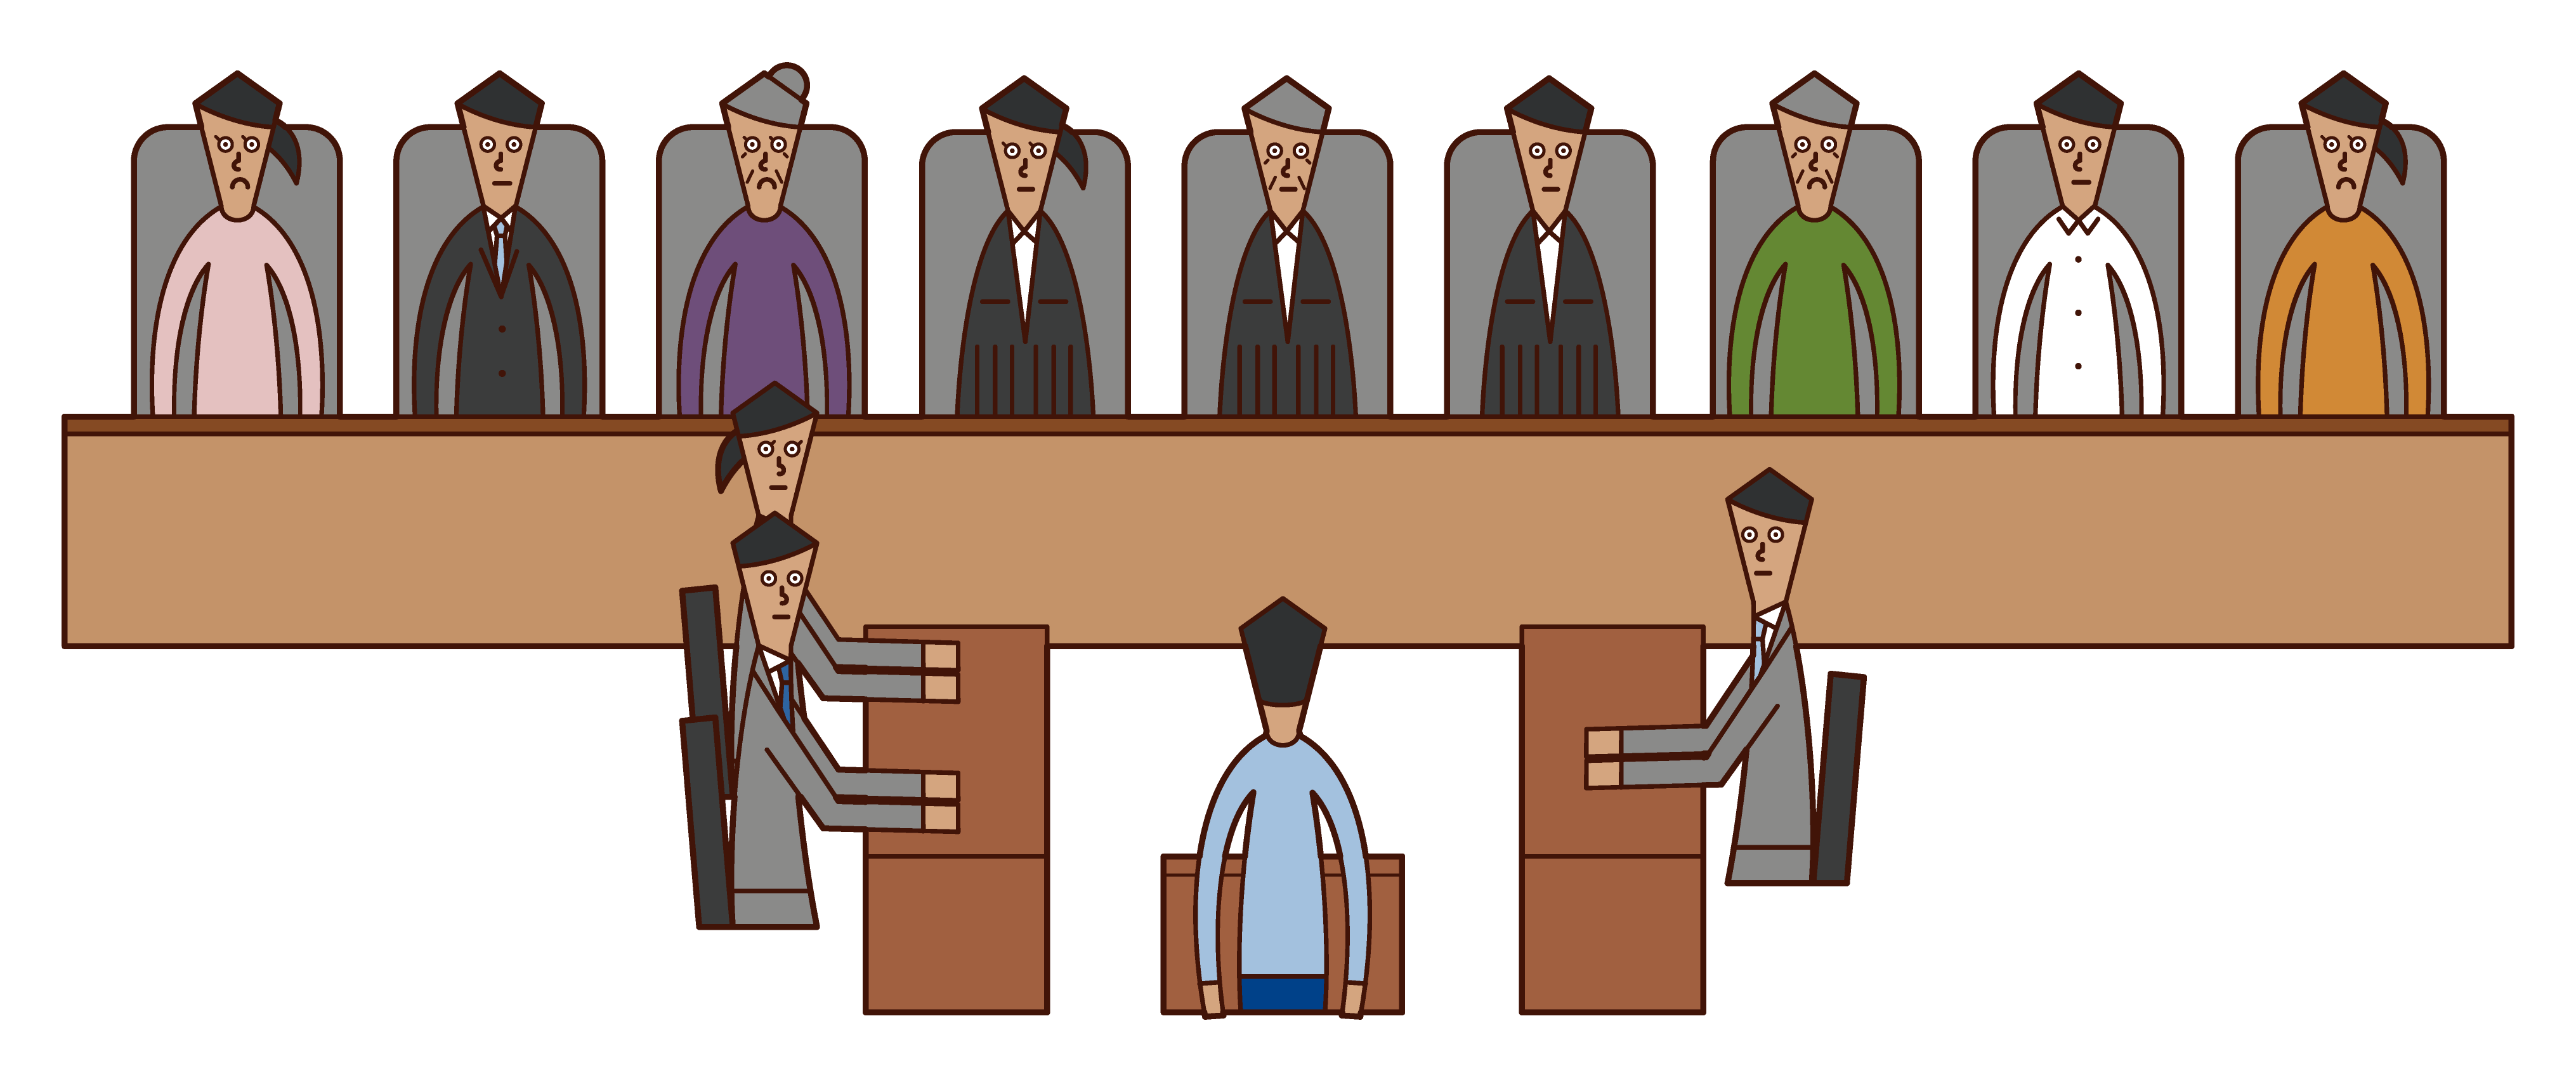 Illustration of the trial judge system